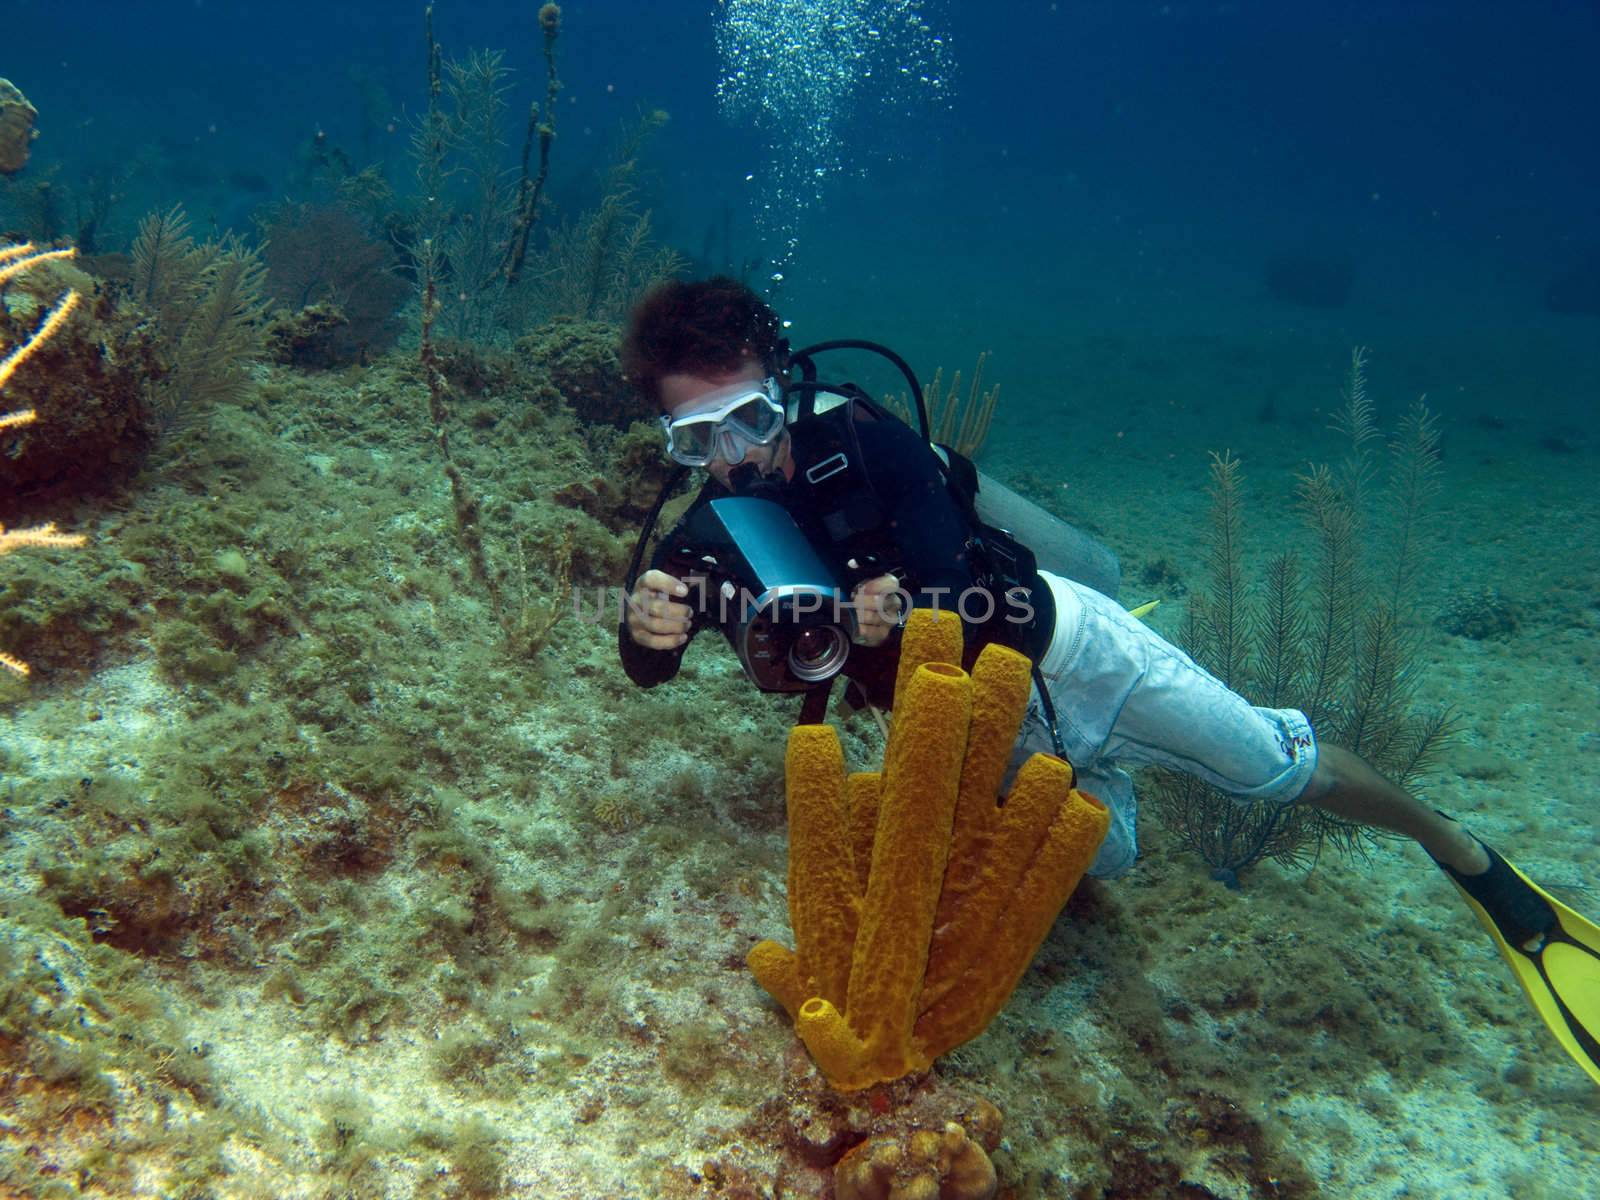 Underwater Vidiographer shooting a Tube Sponge by KevinPanizza